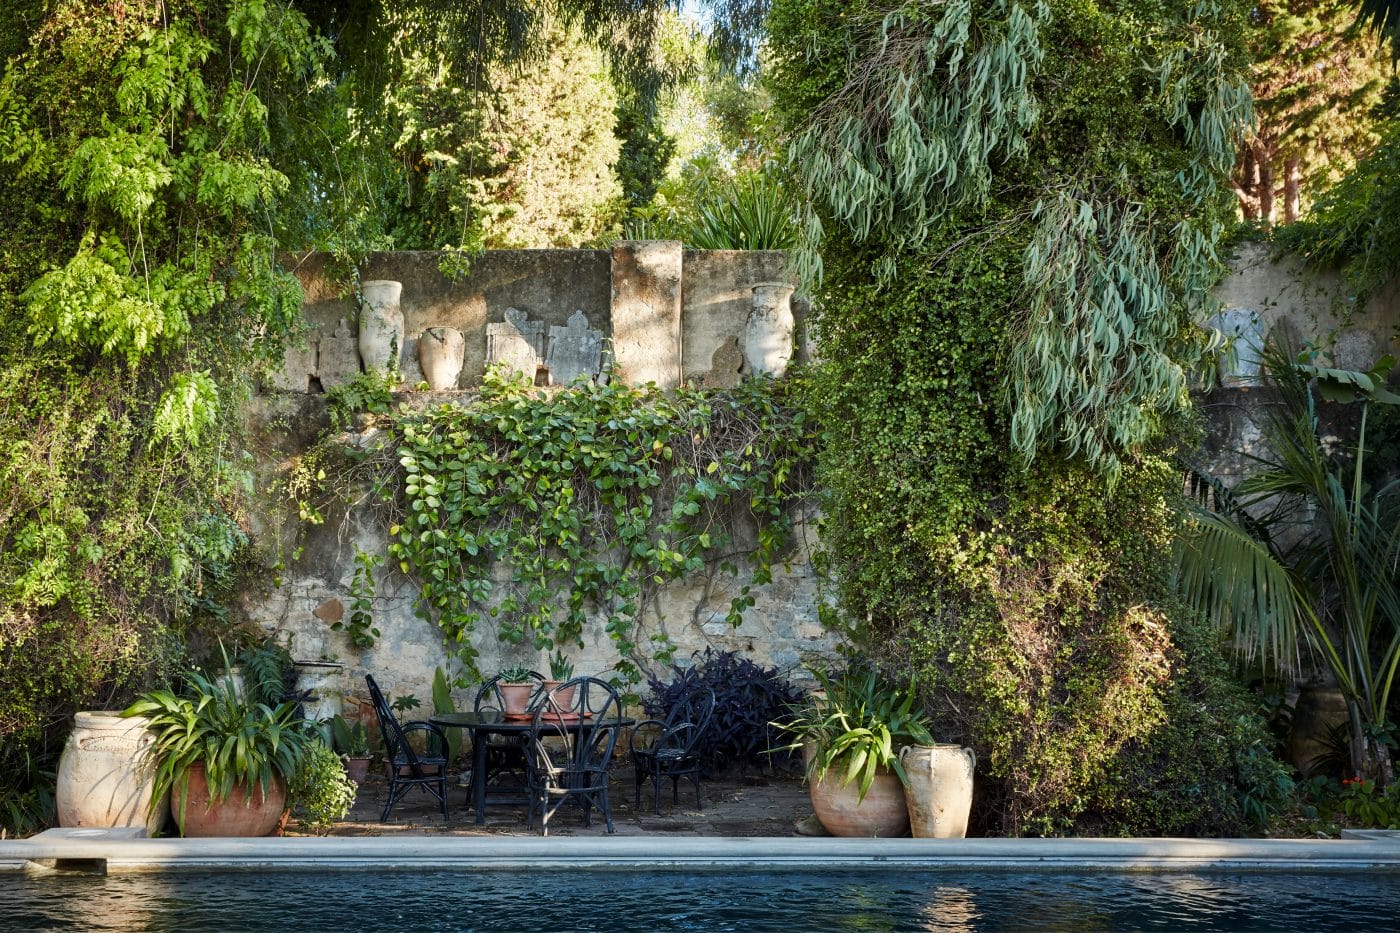 Pool and walled garden at home of Umberto Pasti and Stephan Janson as featured in the Rizzoli book The House of a Lifetime: A Collector's Journey in Tangier Morocco 